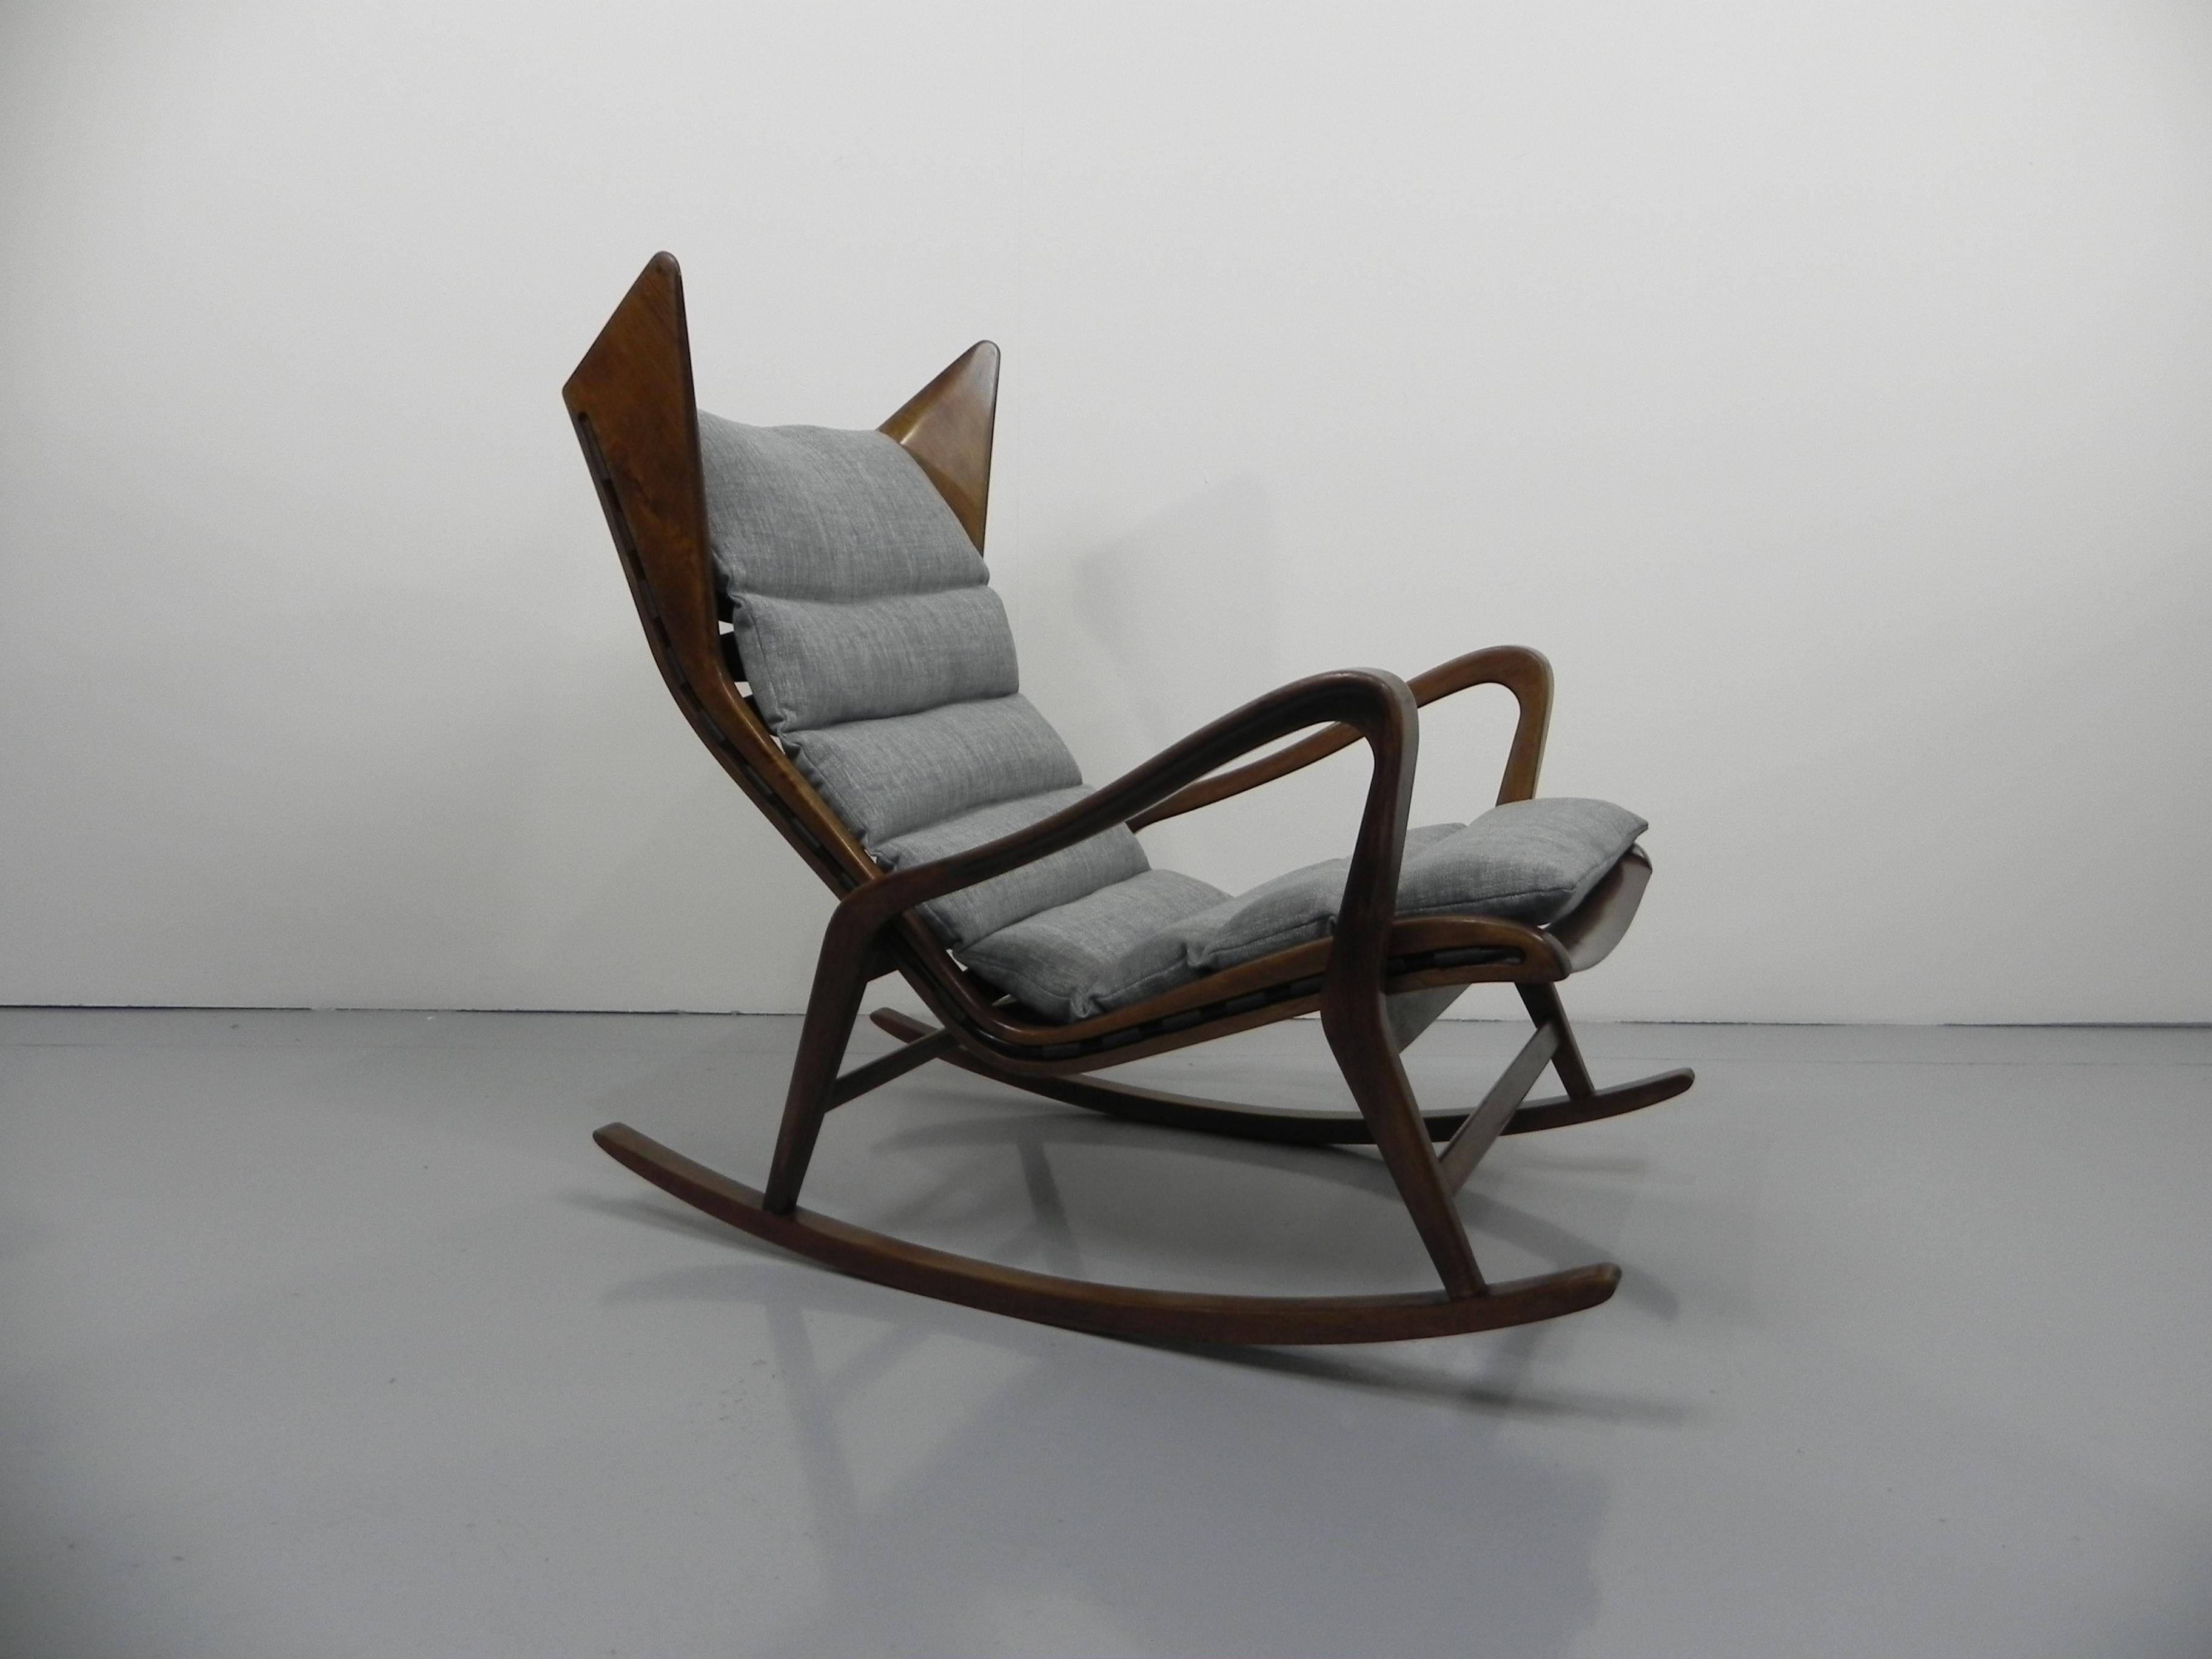 Beautiful rocking armchair, design Cassina 1950 model 572, attributed to Gio Ponti wood walnut, Cassina label, perfect condition.